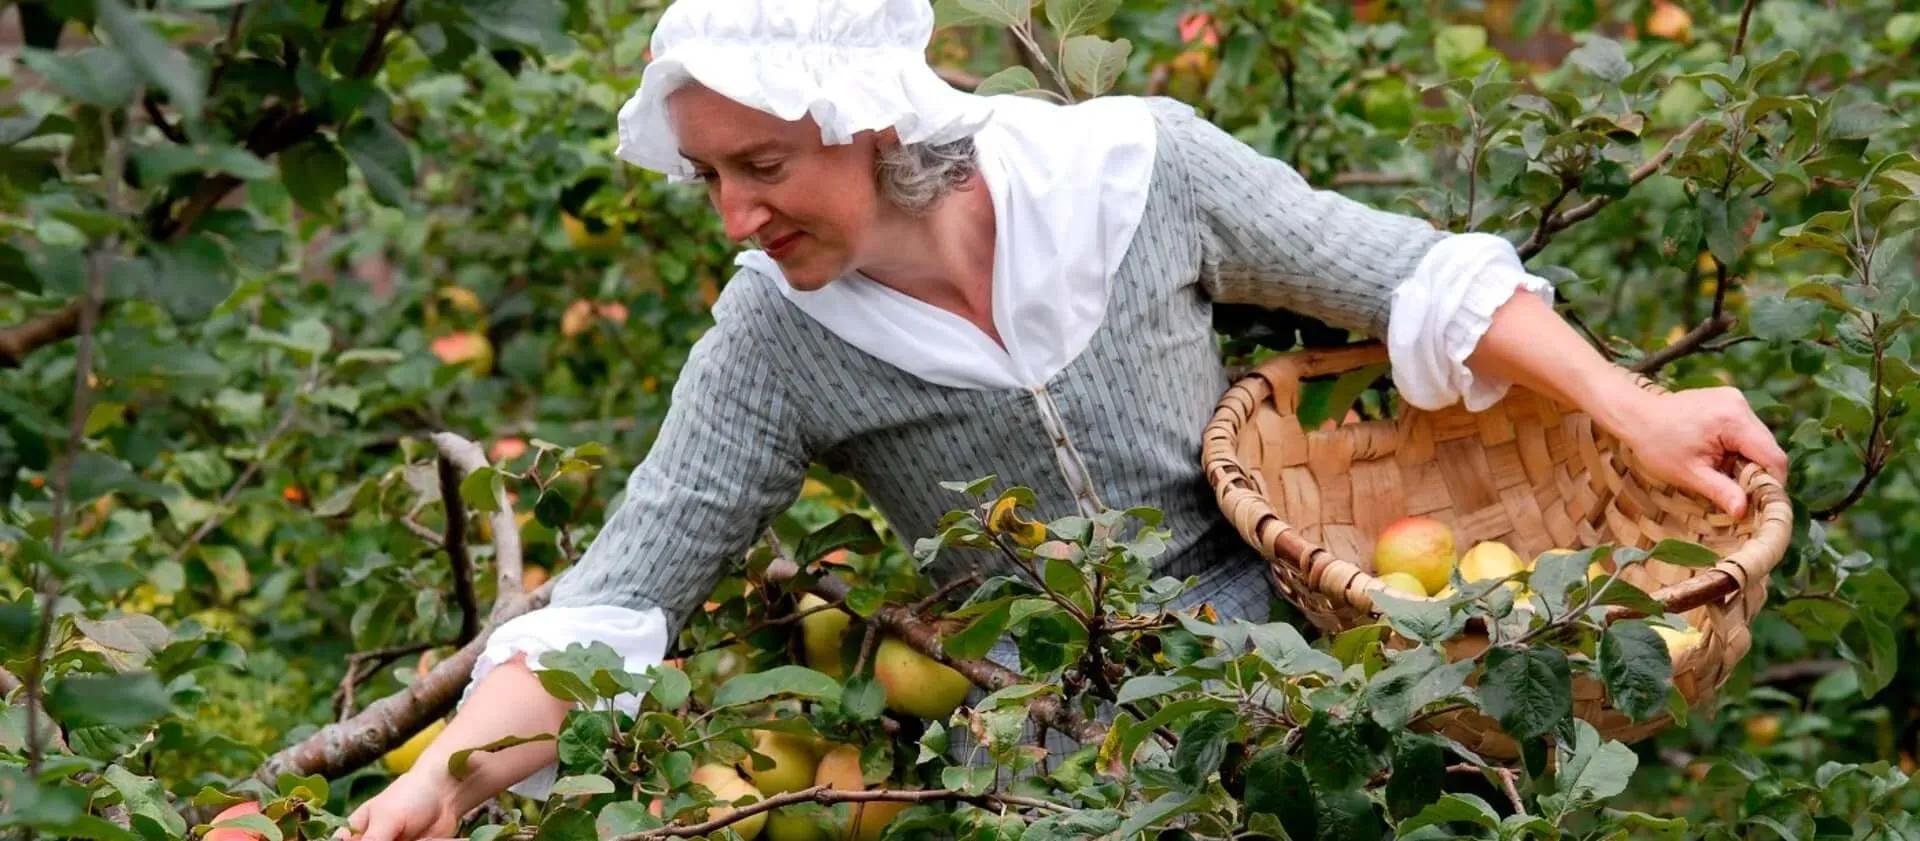 A volunteer in costume as a servant picks apples in the garden of Wordsworth House